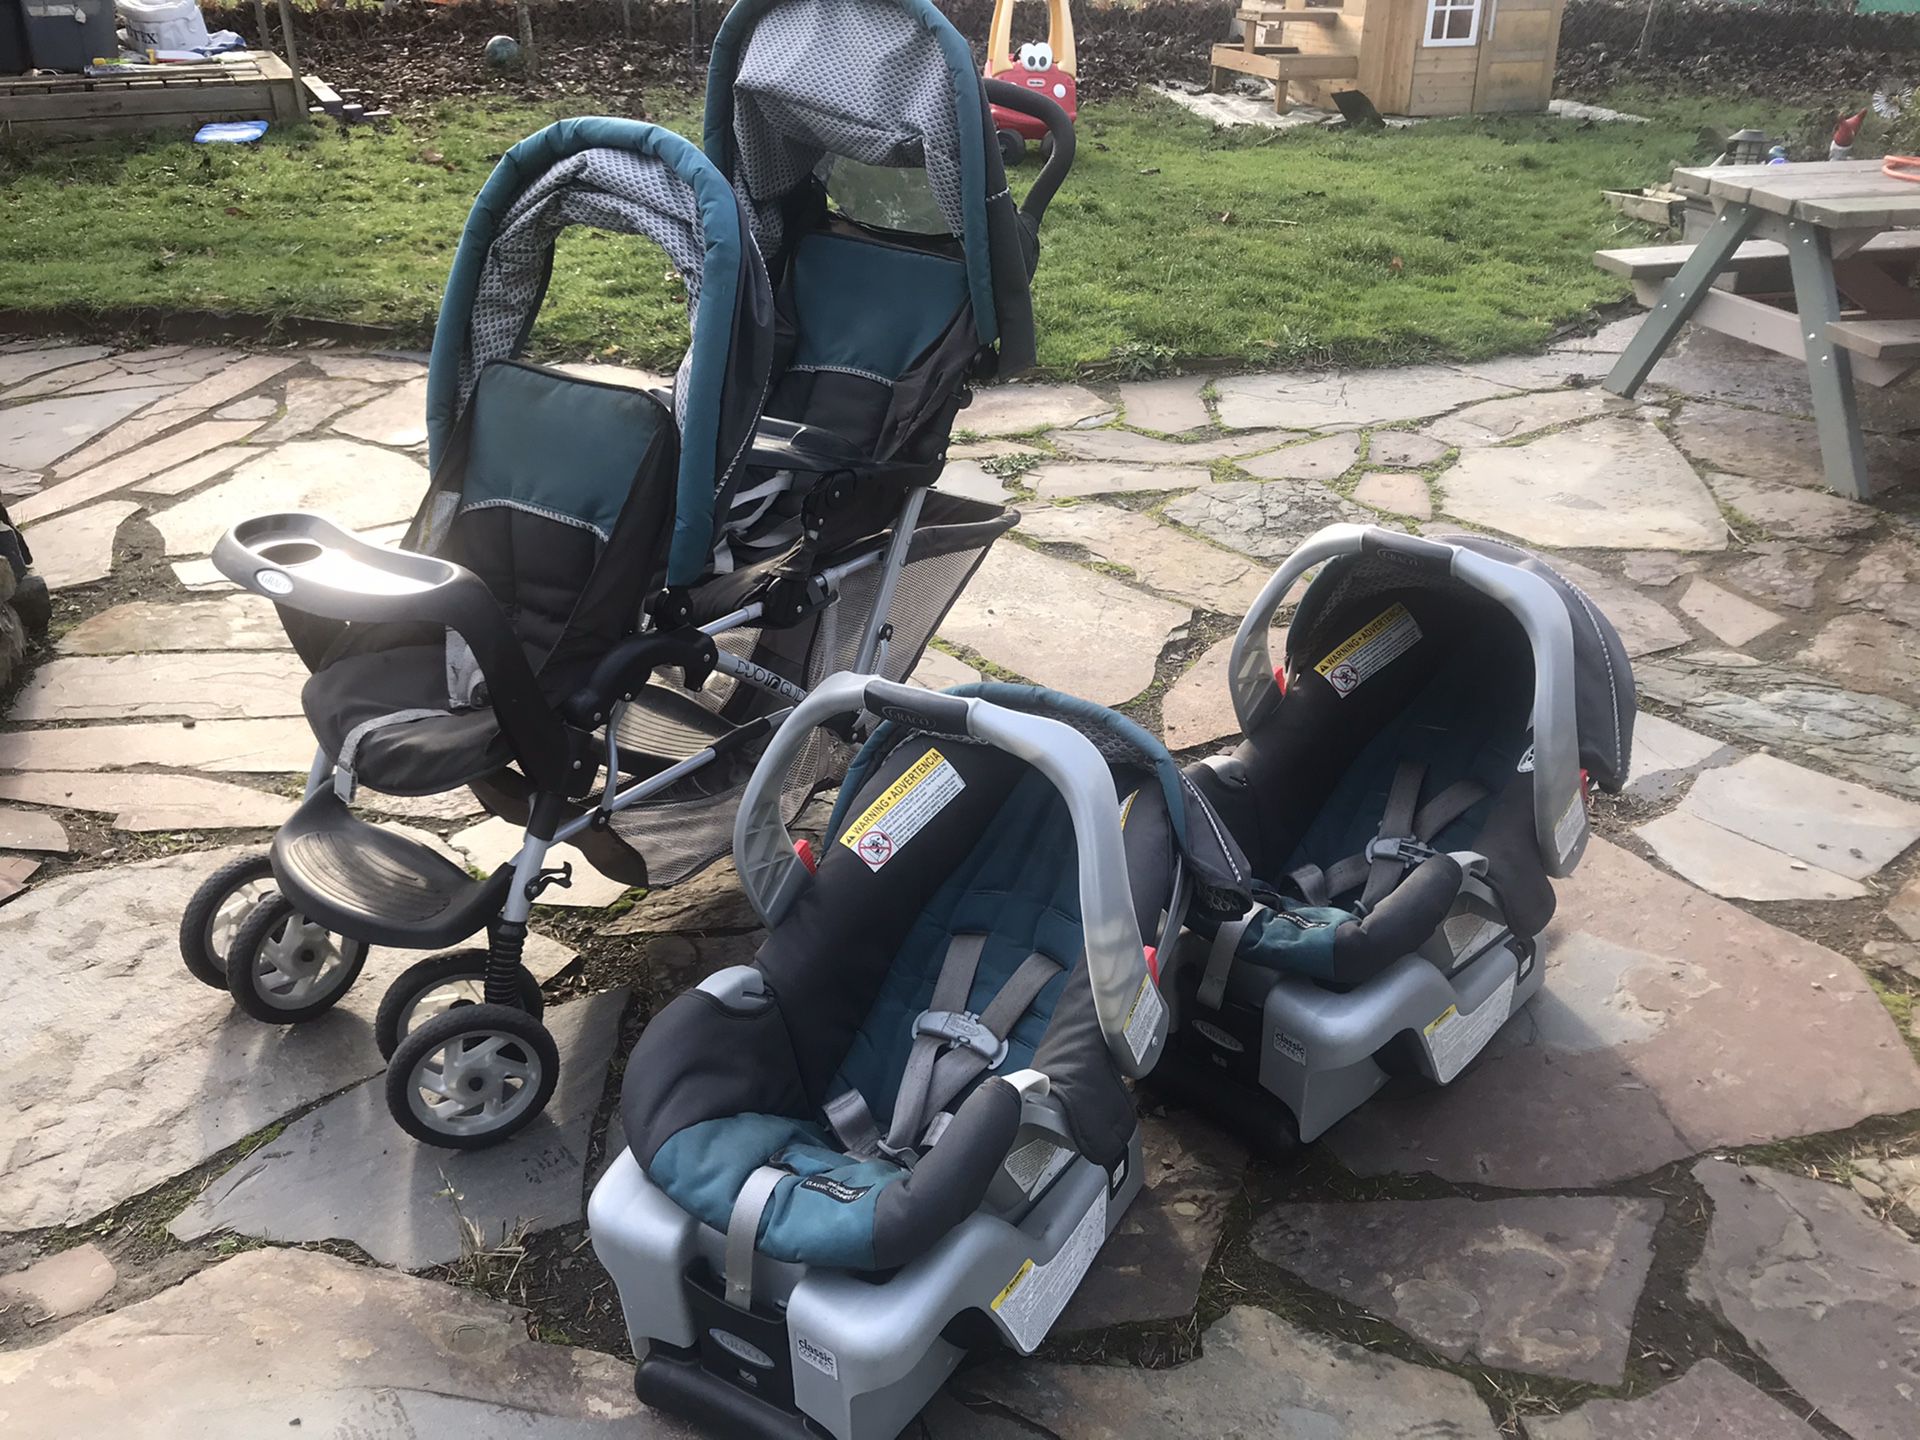 Having twins? Graco stroller, car seats, and bases